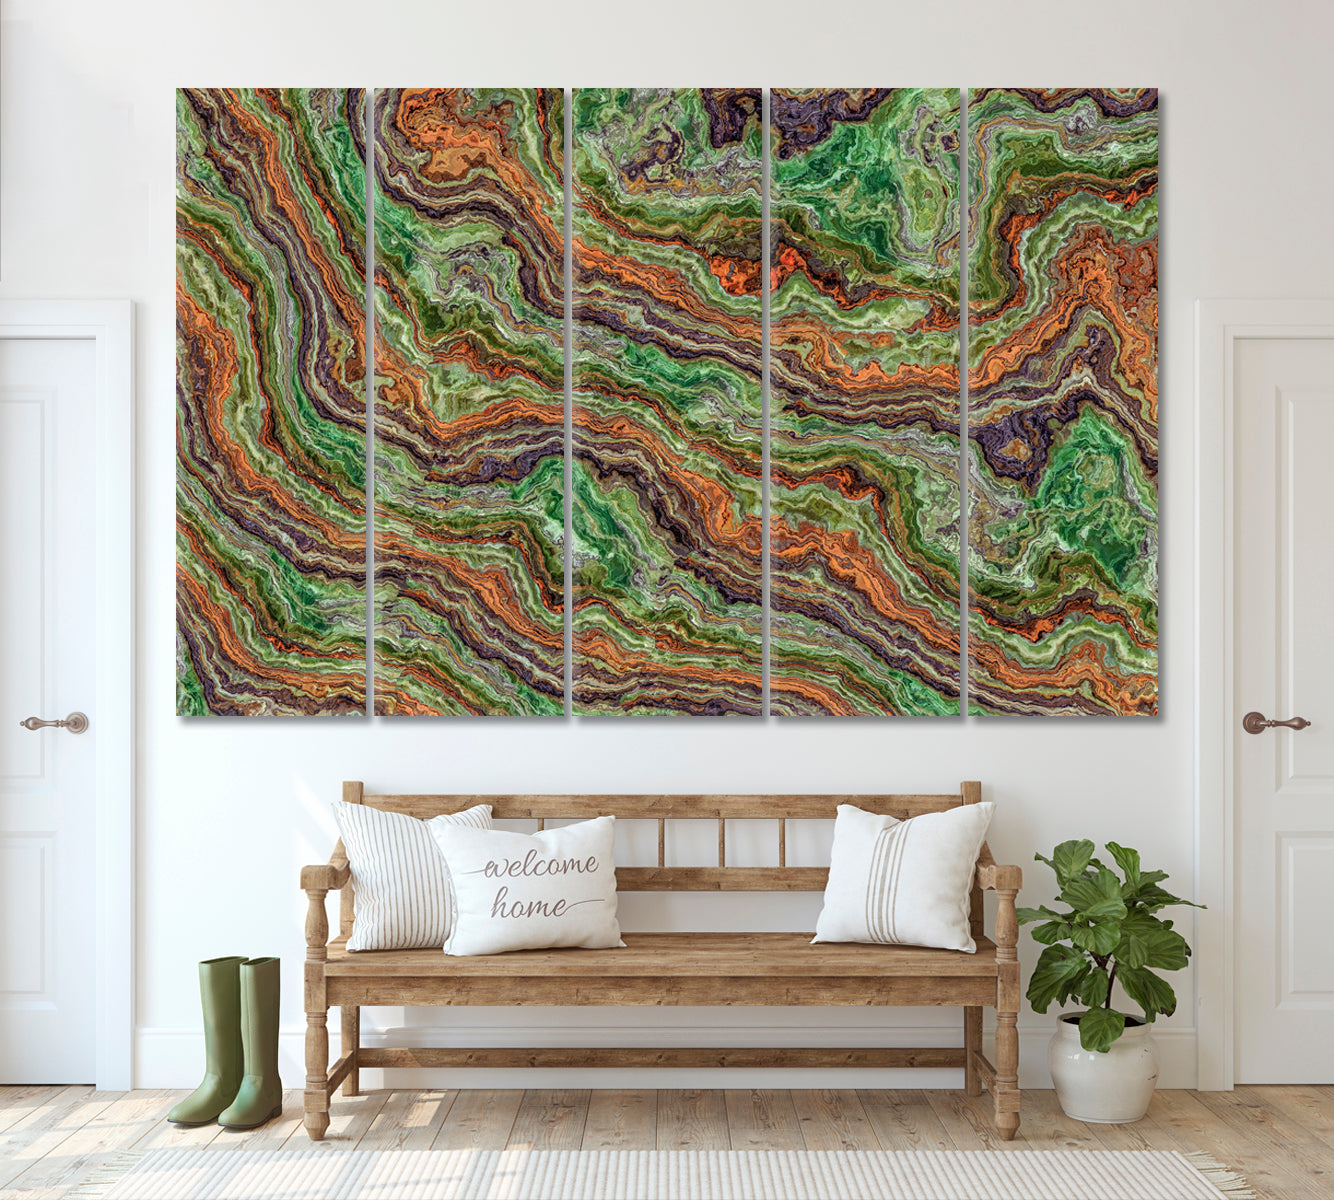 Green Onyx Abstract Pattern Canvas Print ArtLexy 5 Panels 36"x24" inches 